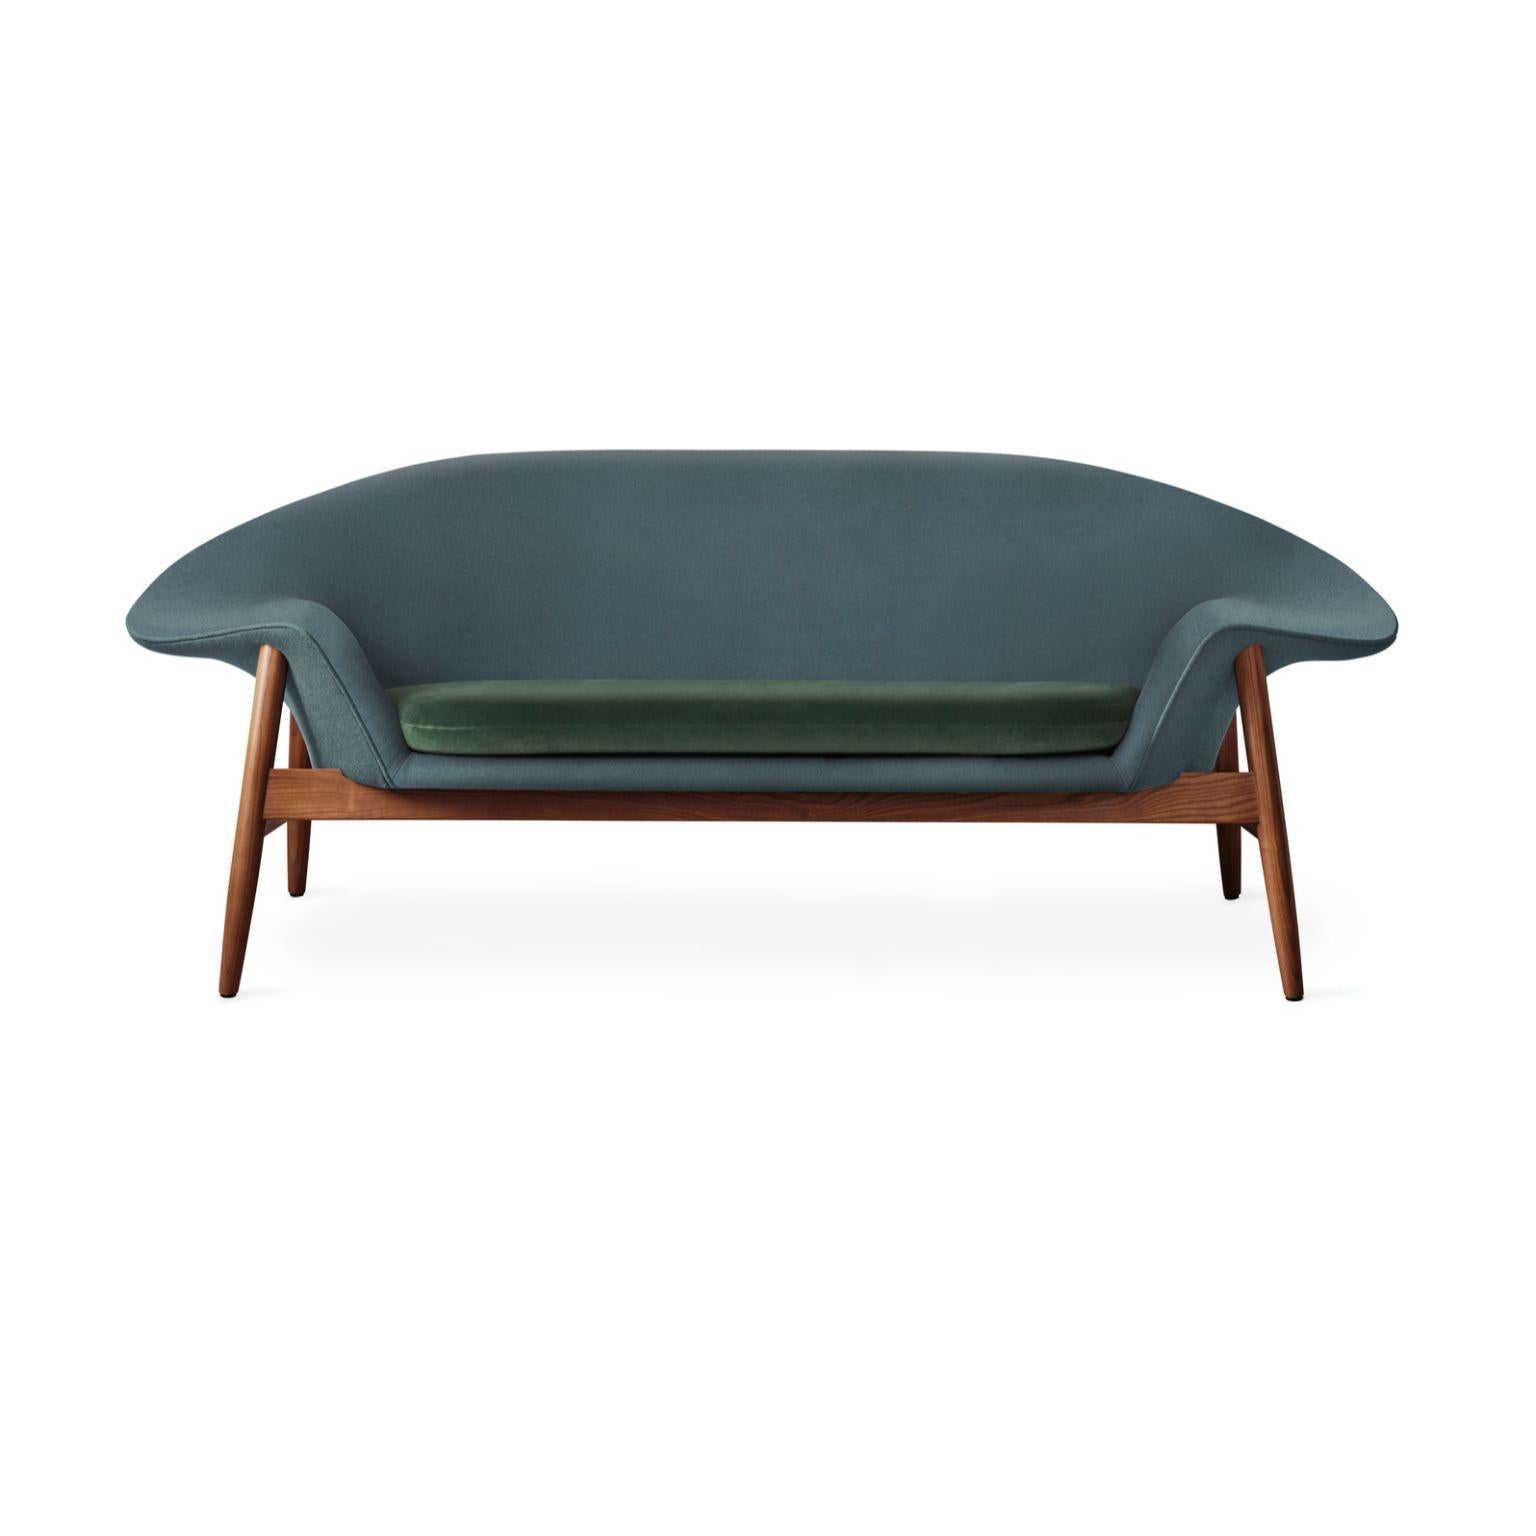 Fried egg sofa petrol forest green by Warm Nordic
Dimensions: D 186 x W 68 x H 68 cm
Material: Textile upholstery, Solid oiled teak
Weight: 42 kg
Also available in different colours and finishes.

Warm Nordic is an ambitious design brand